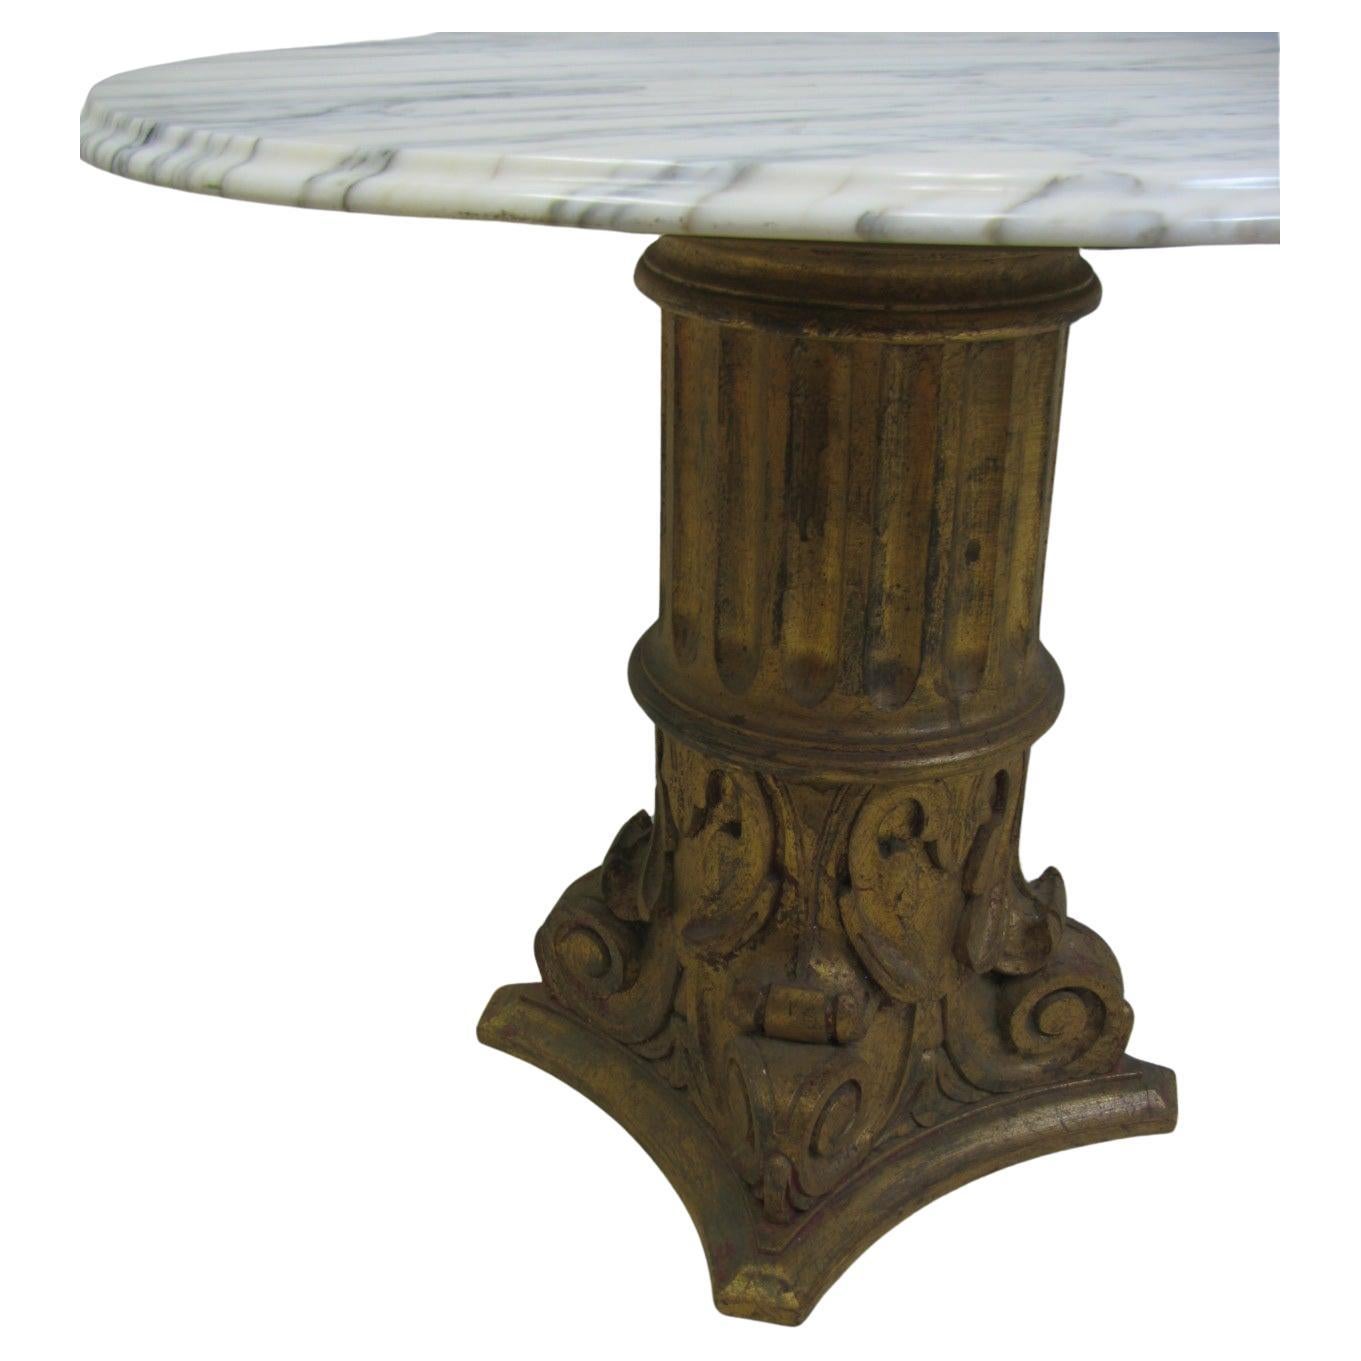 Mid century Hollywood regency European marble-top table. Wood base which is gilt was carved in Spain, marble from Italy. In excellent vintage condition with minimal wear. A great game or side table with some size 